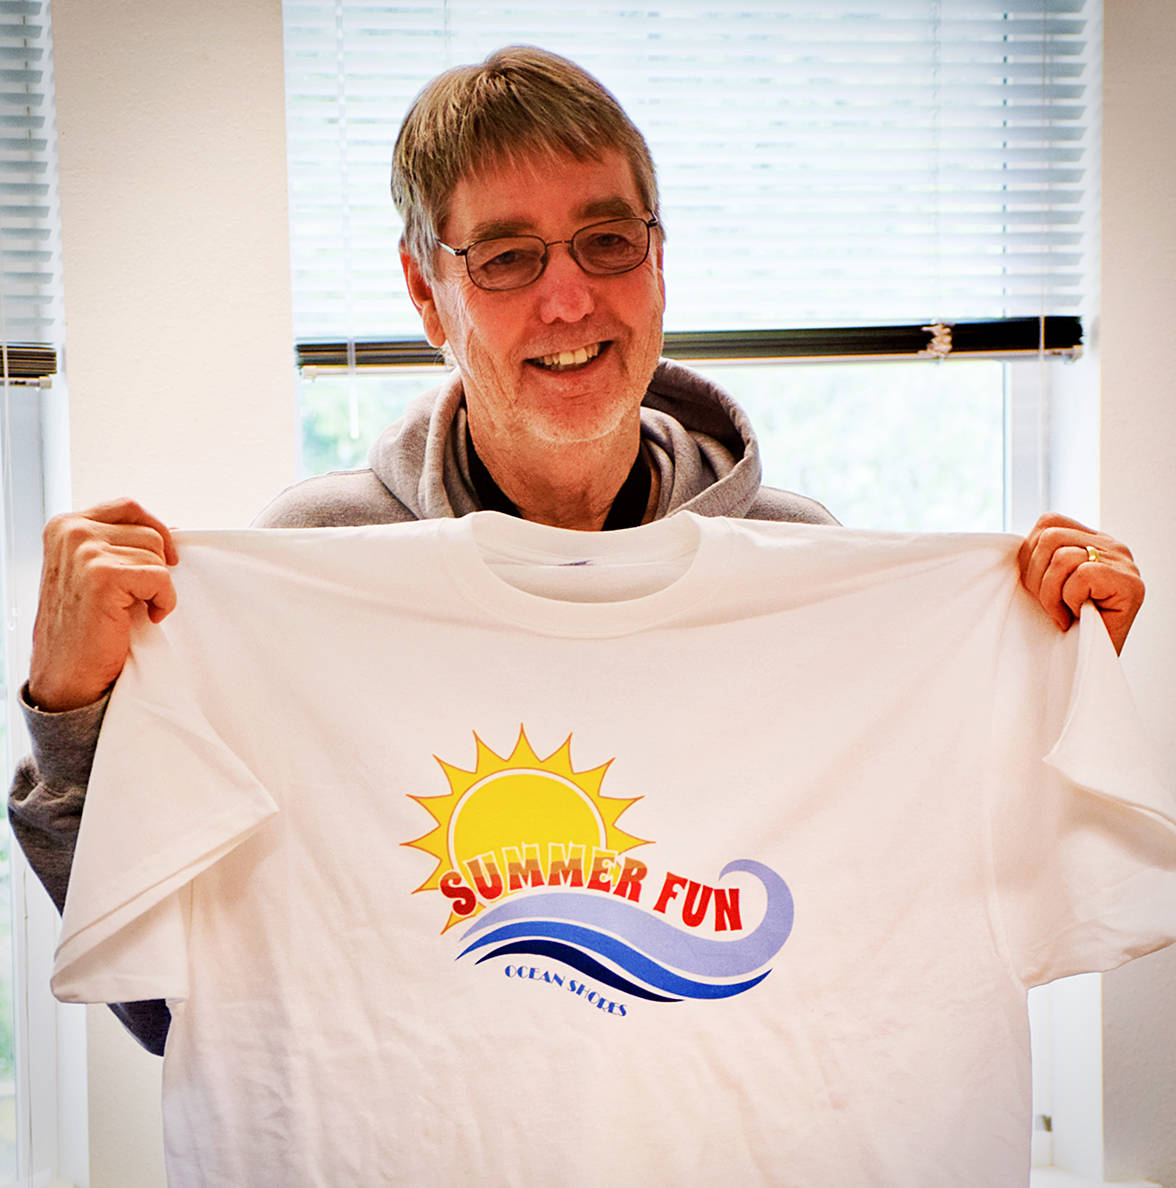 Bob Peterson displays the free T-shirt that North Beach students ages 8-14 will receive when they participate in the Free Summer Fun program at Ocean Shores Elementary School, July 9-27.